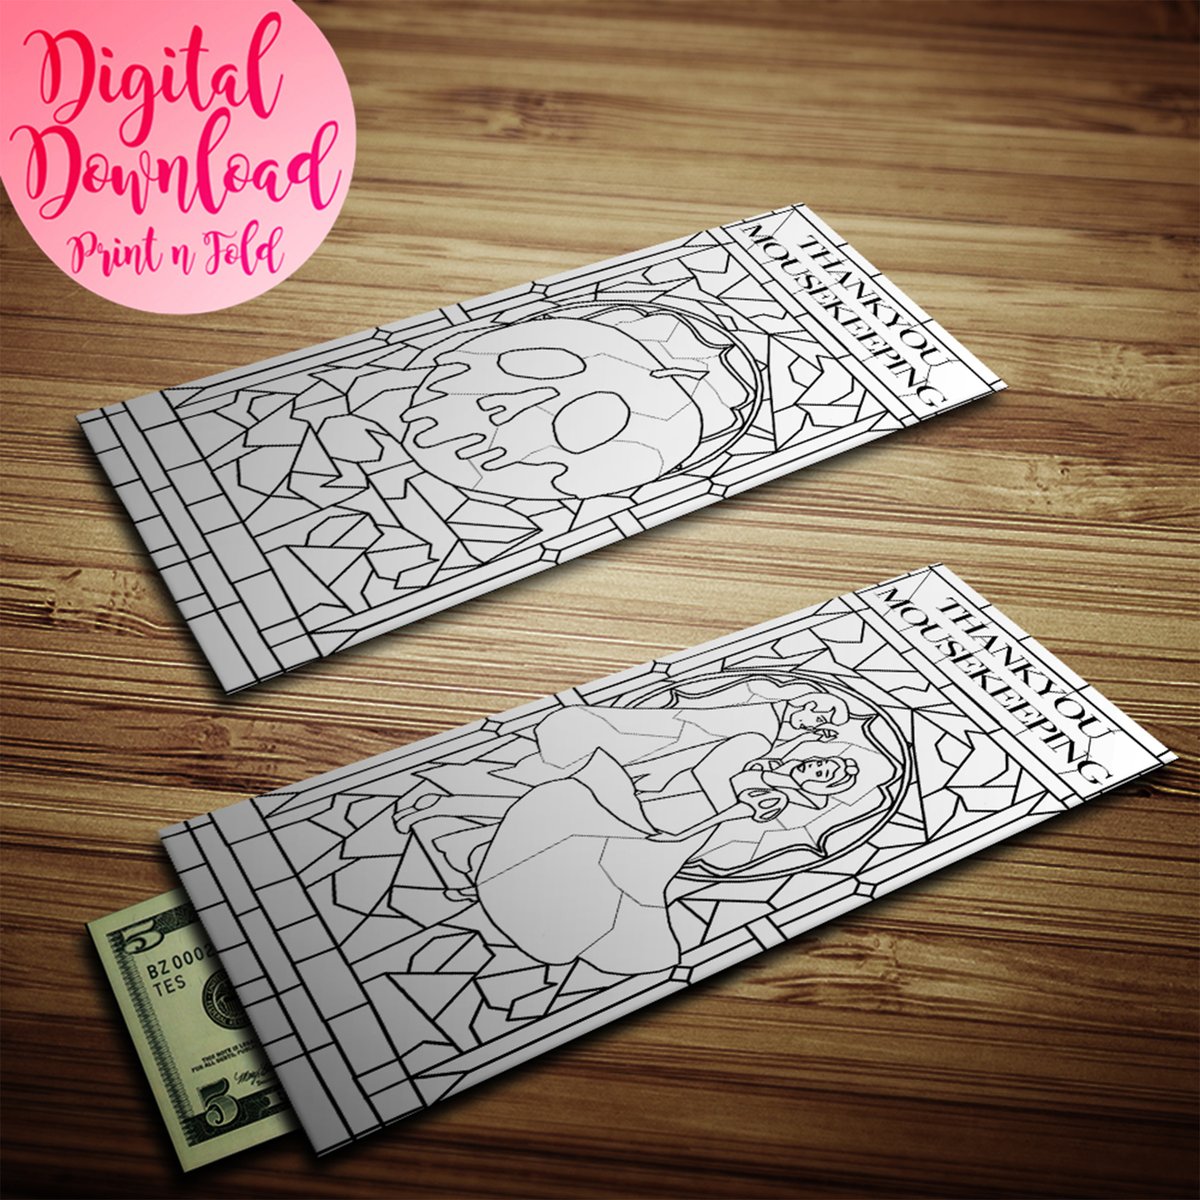 Colour it however you want (maybe even add glitter)

etsy.me/3NerqzZ

#stainedglass #fauxglass #printable #moneyenvelopes #mousekeeping #housekeeping #tips #tipenvelopes #fairytale #vacation #princess